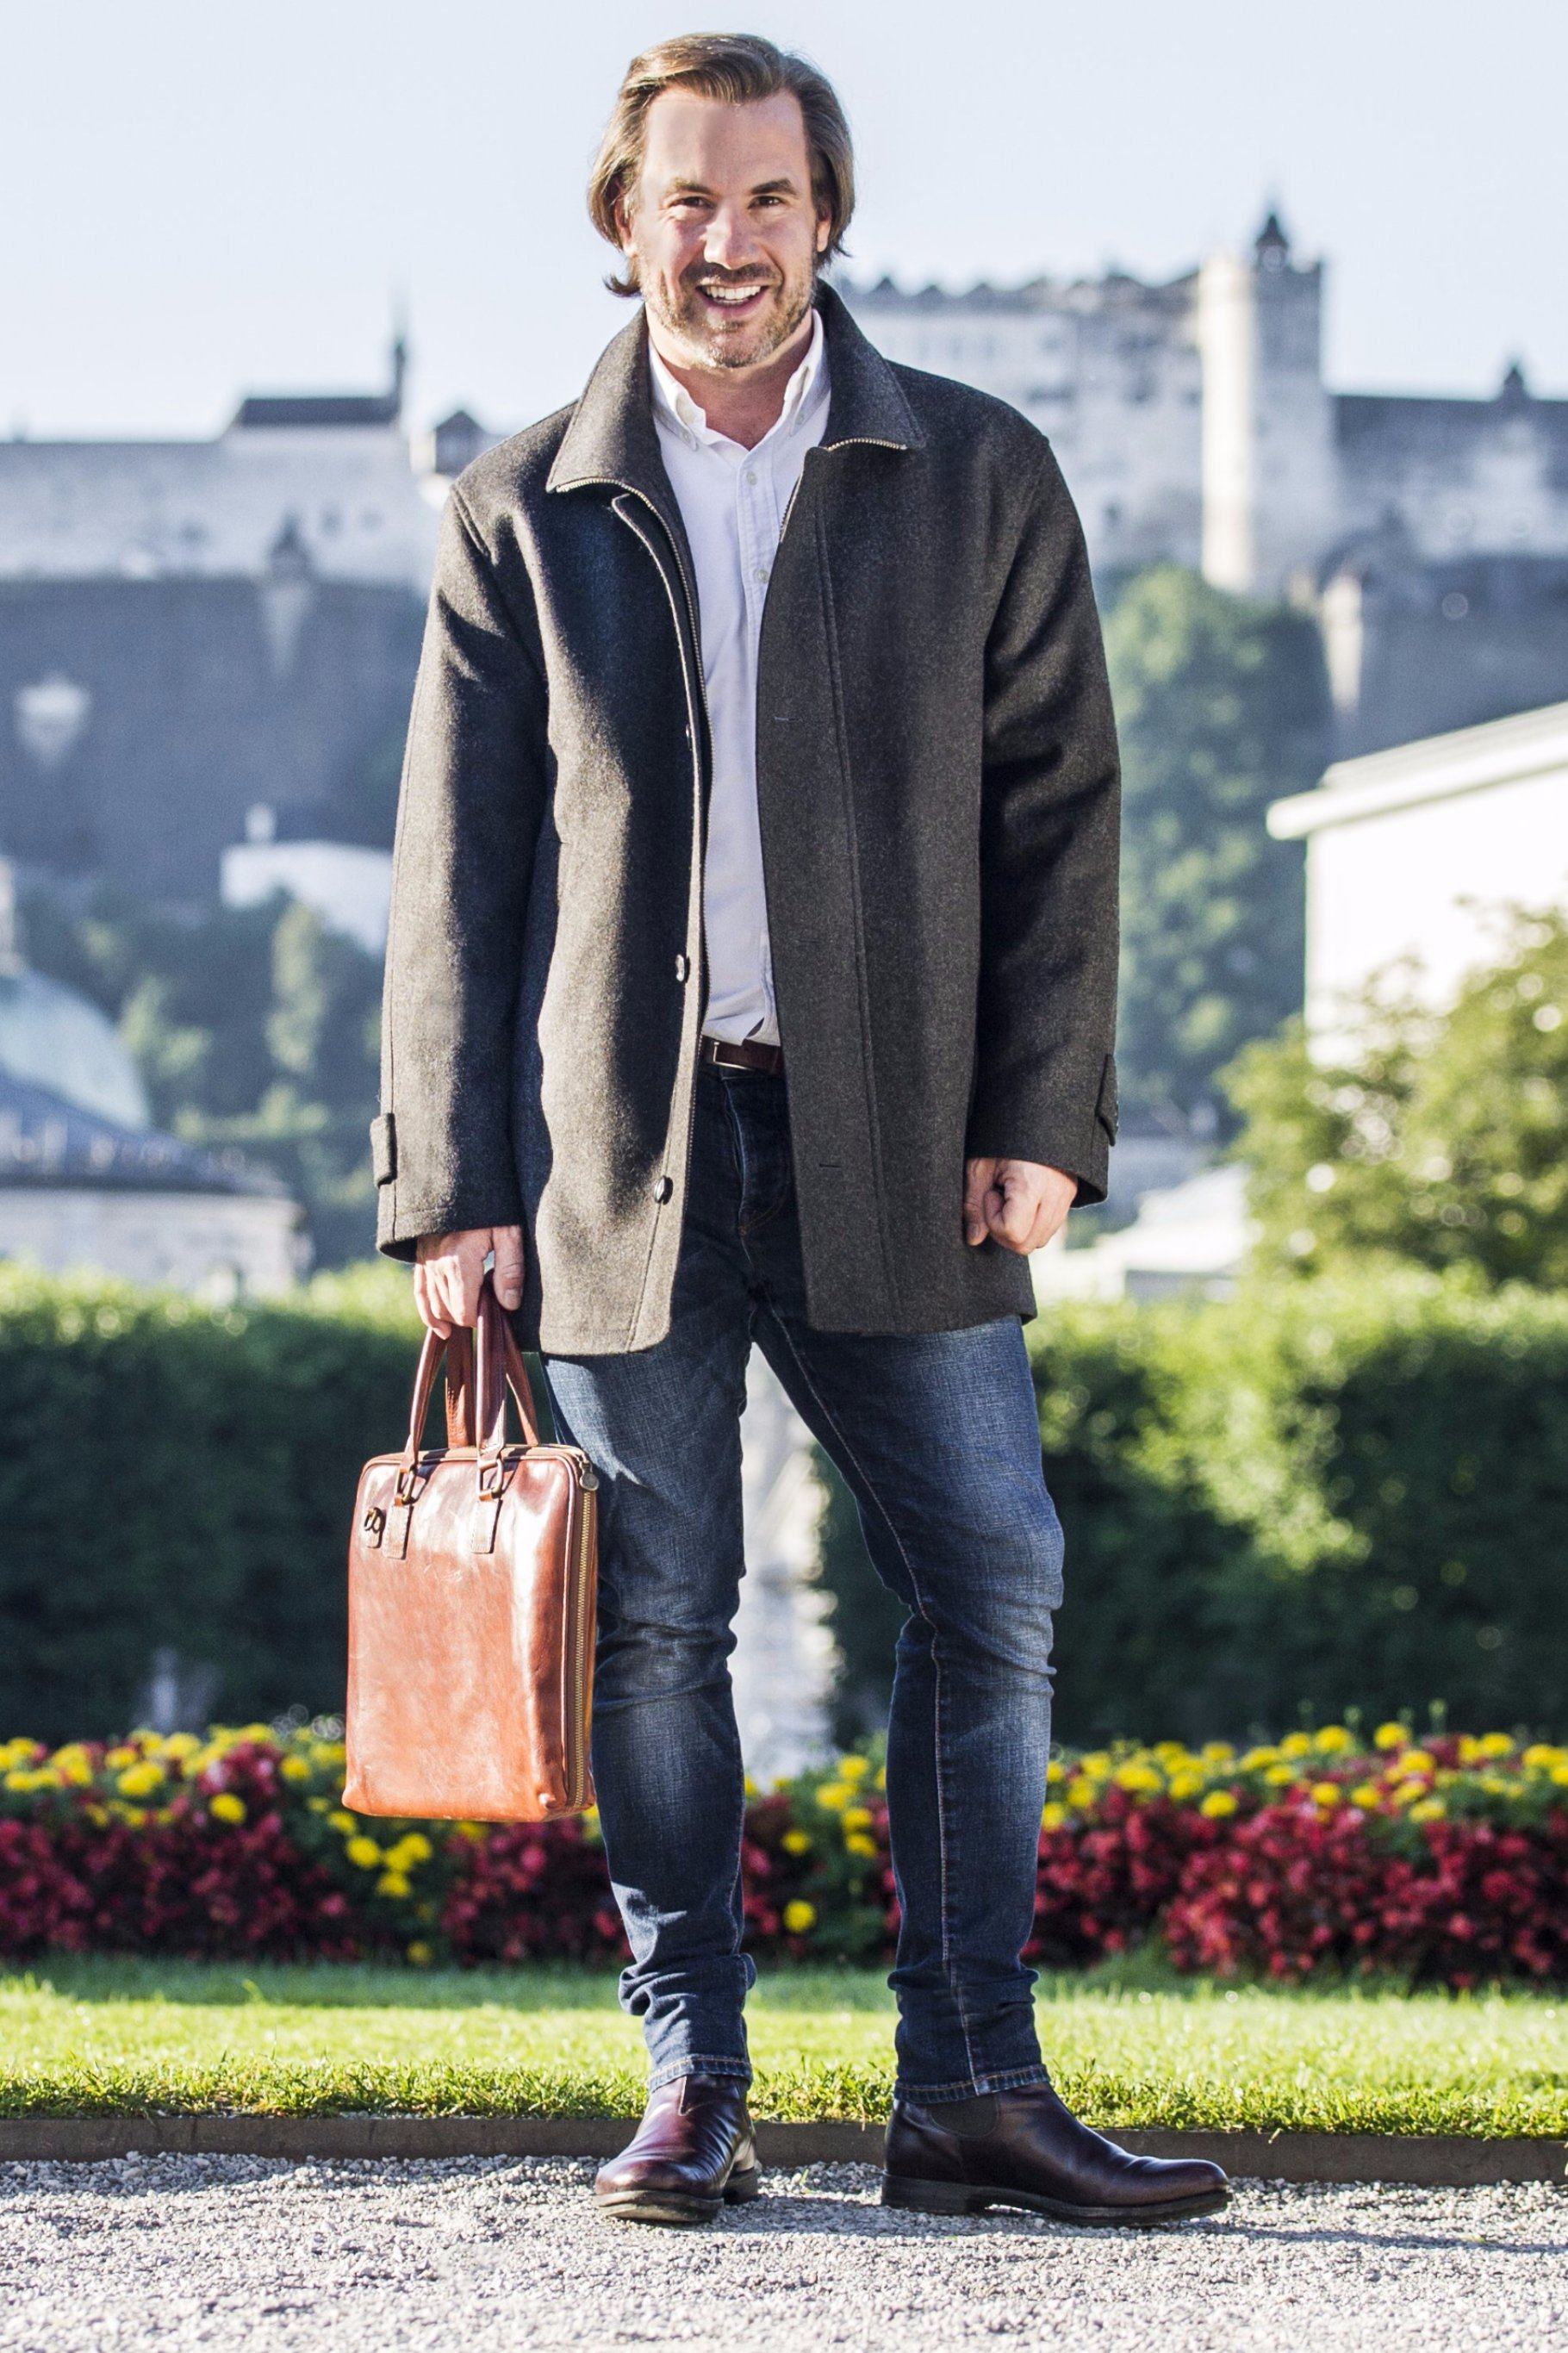 https://cdn.shopify.com/s/files/1/1187/2436/products/man_wearing_Robert_W._Stolz_loden_wool_cruiser_jacket_in_mirabella_park_salzburg_with_castle_in_background.jpg?v=1569026021